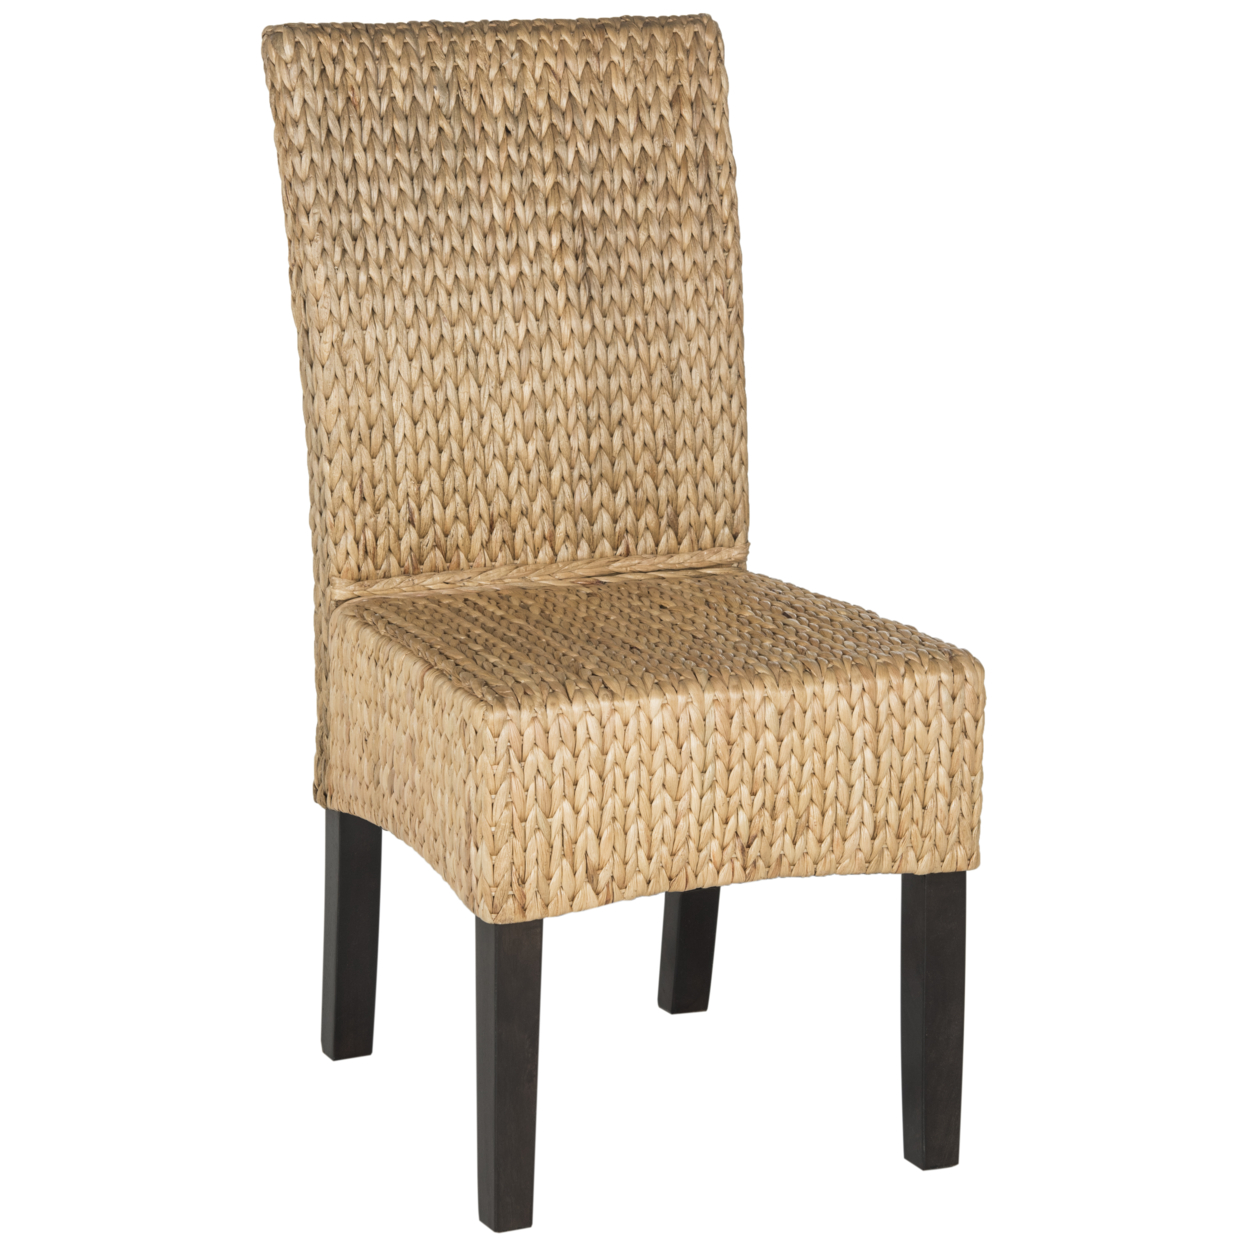 SAFAVIEH Luz 18''H Wicker Dining Chair Natural - image 3 of 7